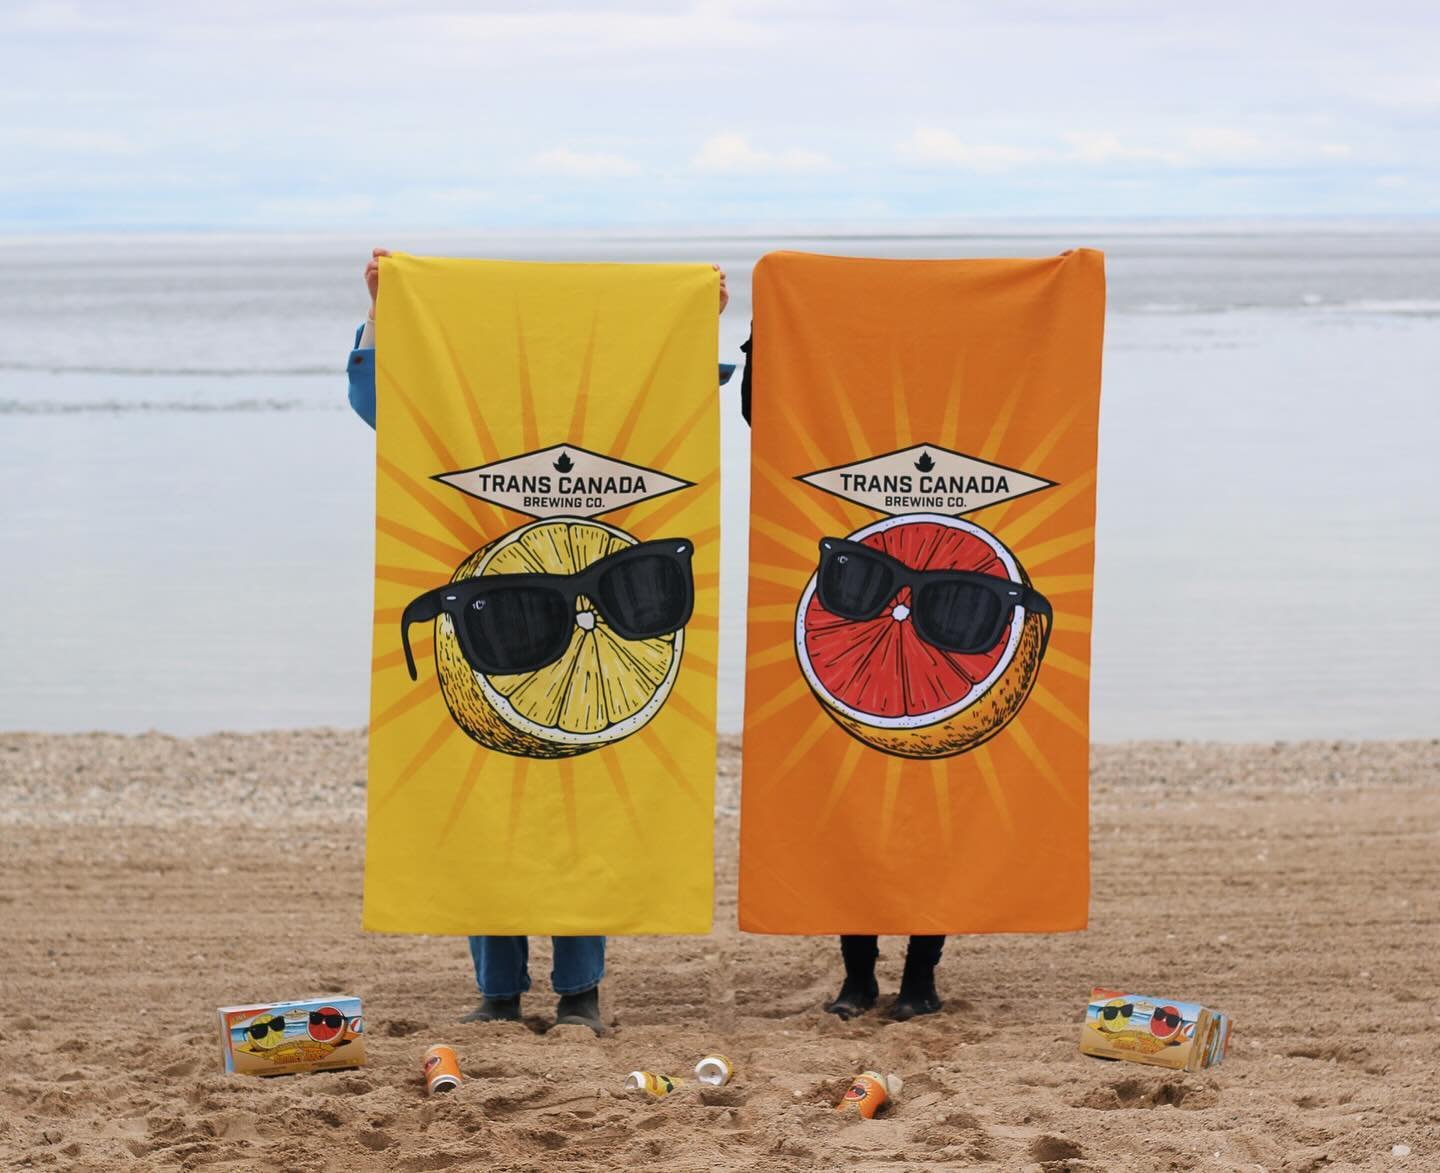 Summer Sipper Beach Towels!

Enjoy a refreshing Grapefruit Radler or Lemon Shandy while relaxing on a matching towel in the sun.

Pick up a towel and an 8-pack today from our General Store!🍻